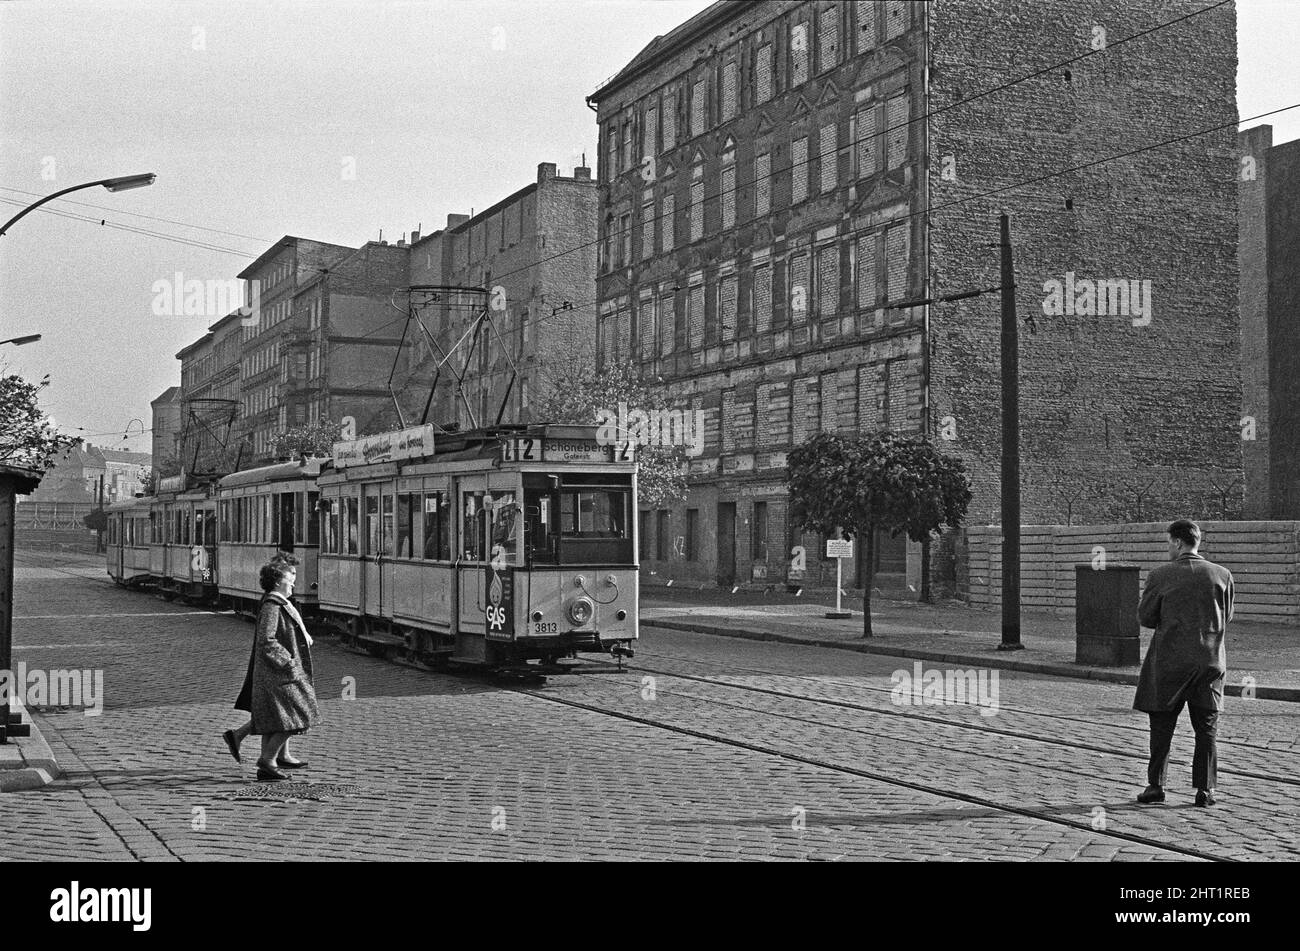 A tram runs along Bernauer Strasse, Berlin. The buildings on the east side of the street are in East Berlin, and the sidewalks and the street in West Berlin. Since this meant that a resident could walk out their front door to freedom, the East German authorities ordered the forcibly evacuation of all dwellings on the border and bricked up all the entrances and windows. Circa 1965 Stock Photo